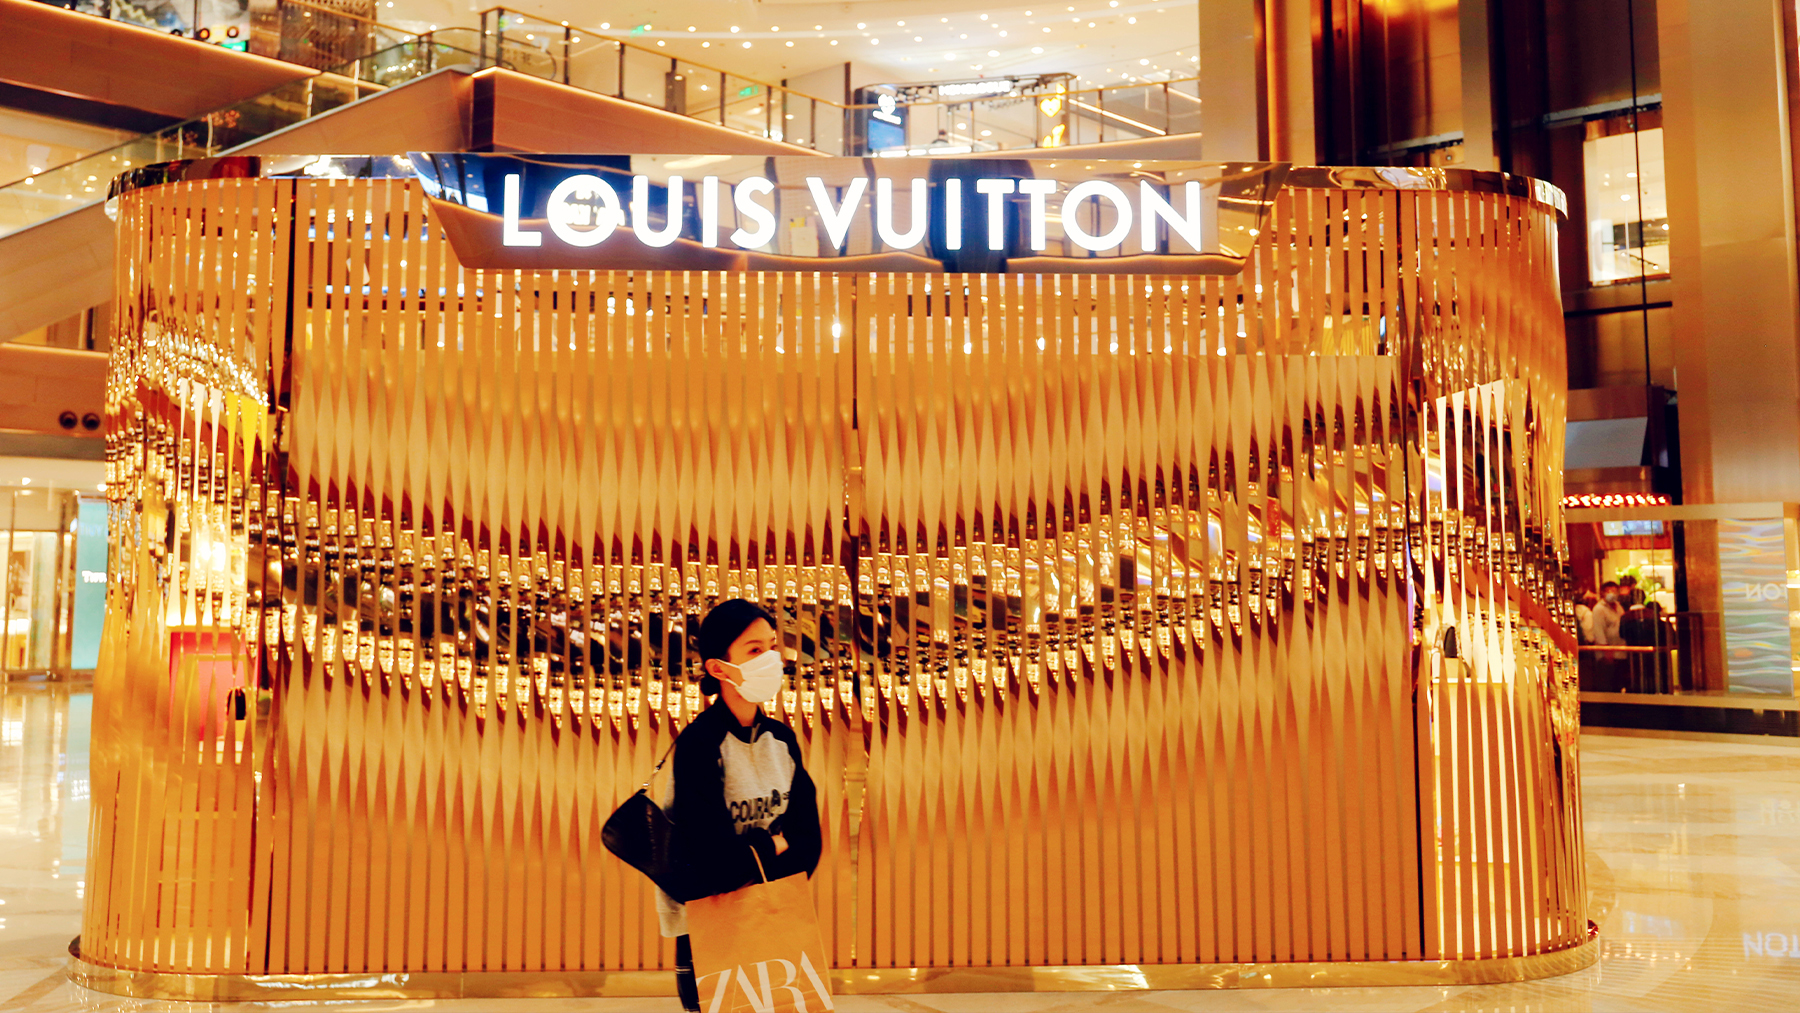 Louis Vuitton Raises Prices Worldwide Due To Increased Costs And Inflation